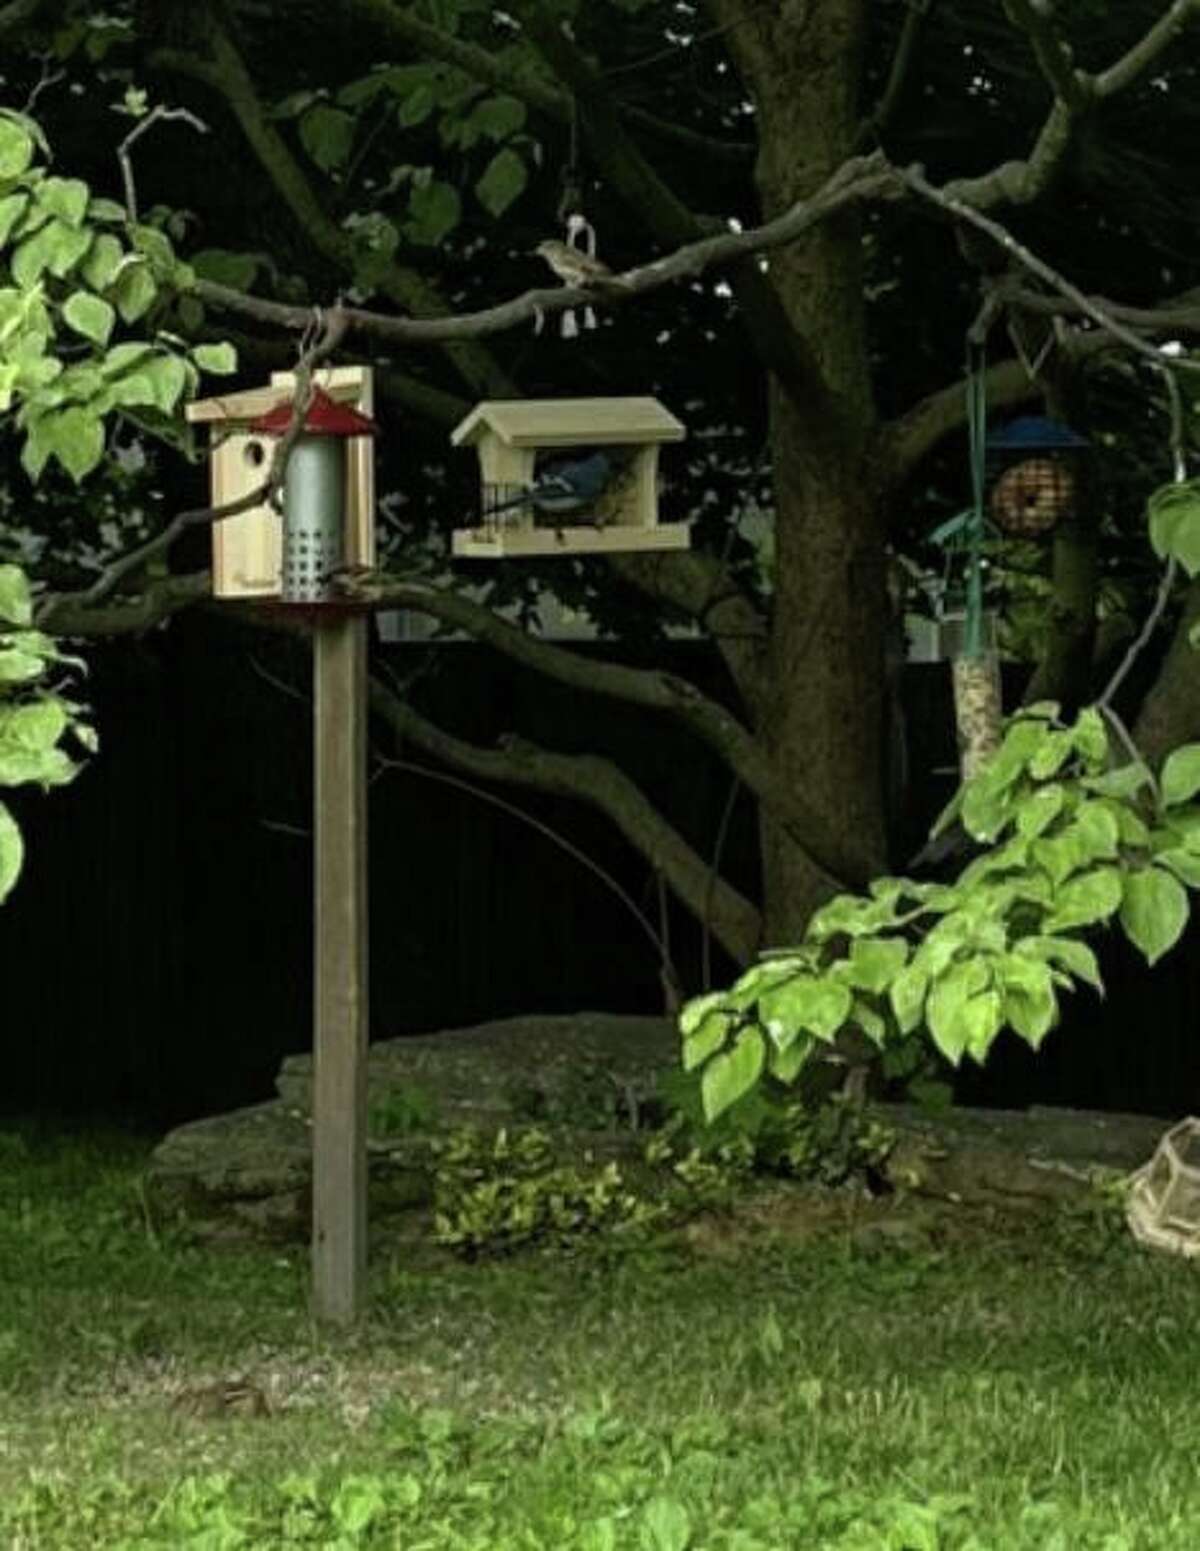 Mike is a lifelong resident and is a student at Amherst. Amid many recent headlines on the political polarization of Greenwich, America & the world - this photo of a Blue Jay and Cardinal calmly sharing food and enjoying a misty Sunday evening together, in hand-made birdhouses the photographer built for them, is peaceful and inspiring. Photo 6/12/22, by Mike J. Pastore, Amherst College student & Greenwich native, home on summer break. Sent w. Mike's permission, copied above. Thank you. (My son Mike just took this photo of the two birds enjoying this lazy overcast Sunday. He is home from Amherst College, working, then heading away for a summer job in music).